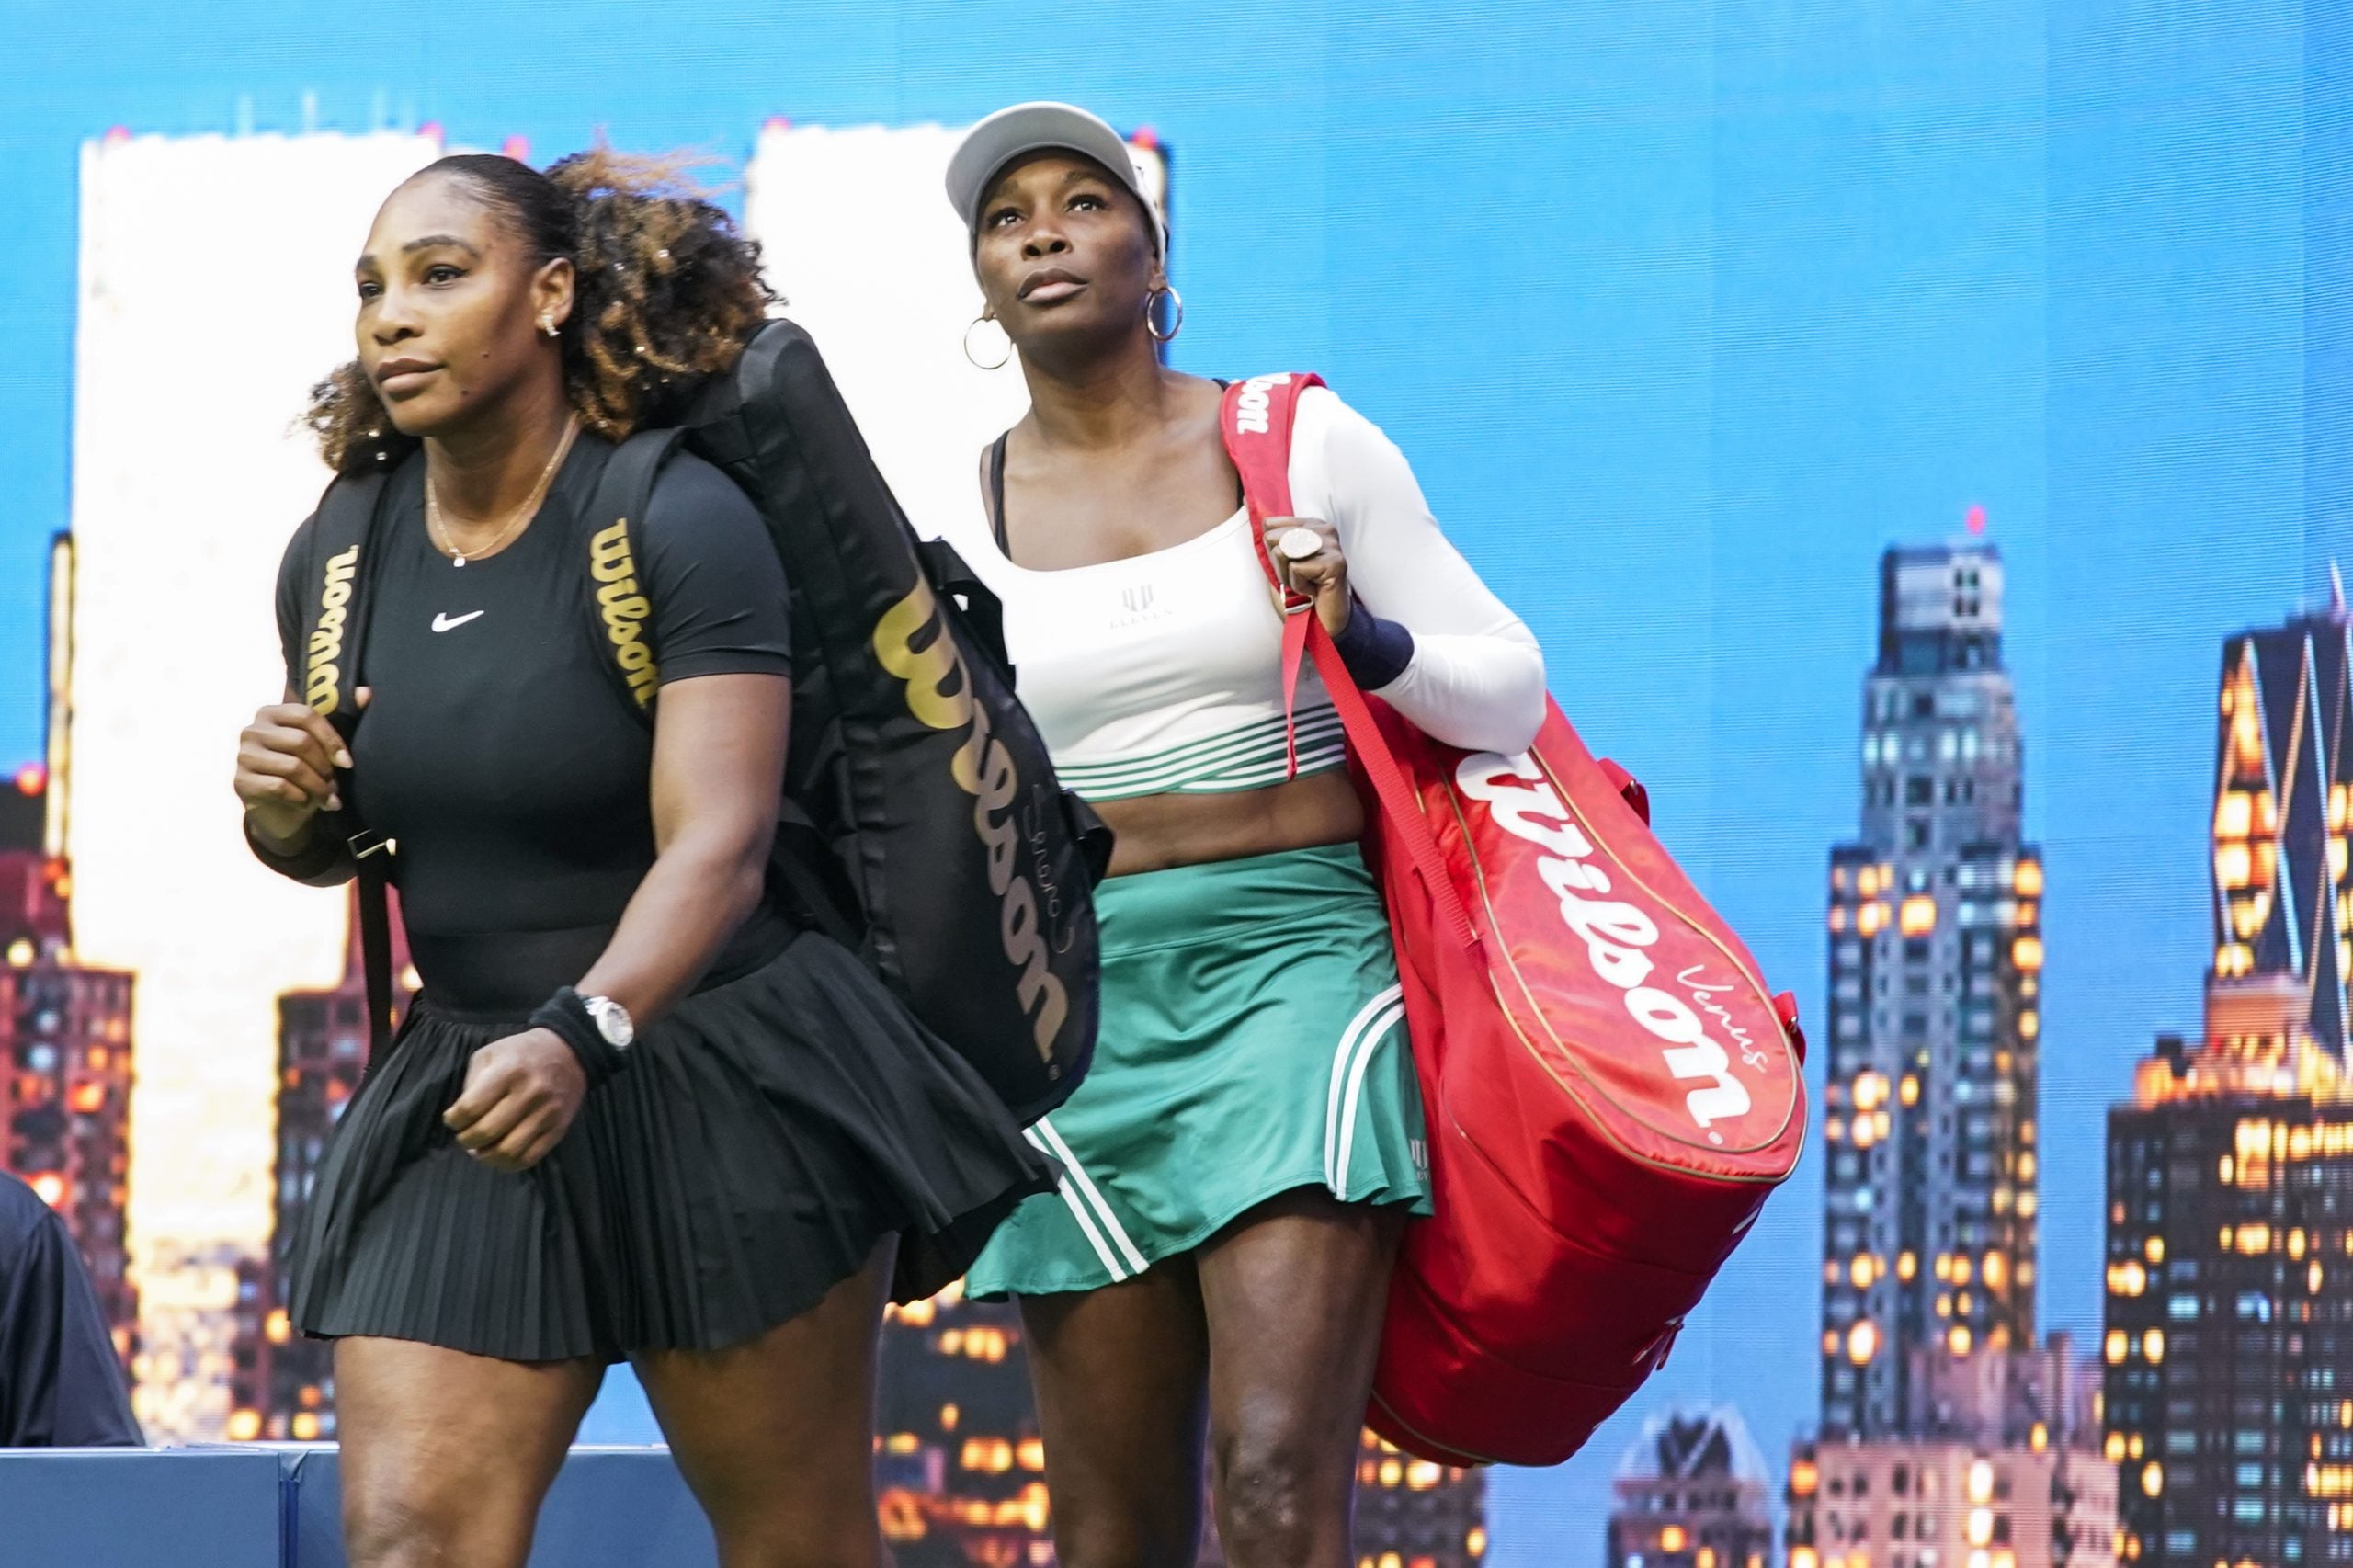 Star Gazing: Zendaya, Offset, Lala Anthony, Spike Lee And More Storm NYC For Serena Williams’ Final U.S. Open